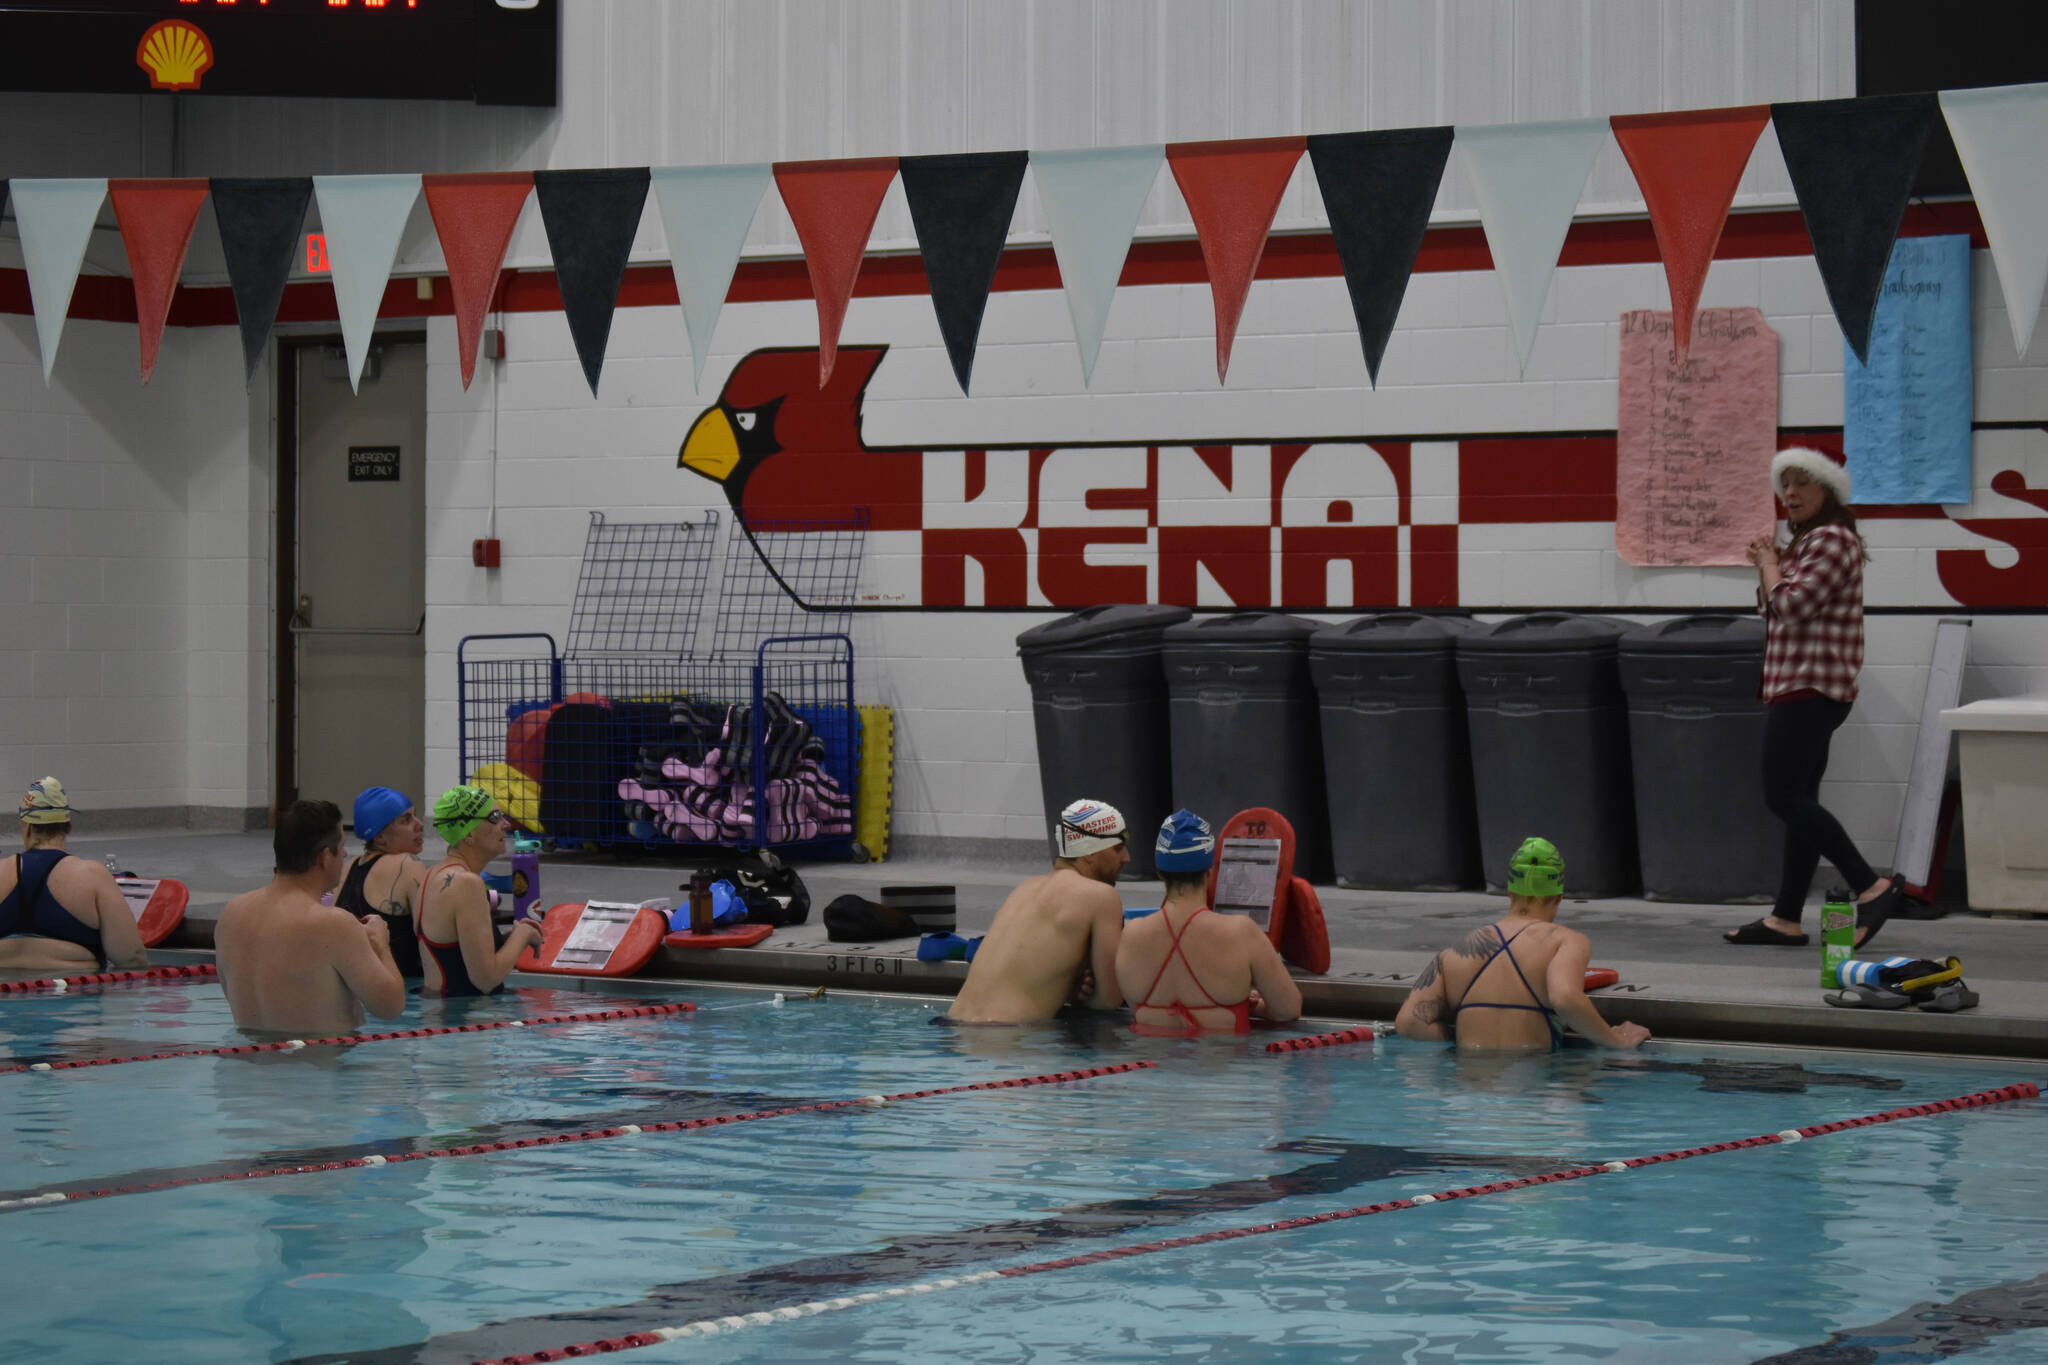 Swimmers gather at the wall to receive their next workout set from Coach Angie Brennan during a Top of the World Swimming practice on Wednesday, Dec. 14, 2022, at Kenai Central High School in Kenai, Alaska. (Jake Dye/Peninsula Clarion)